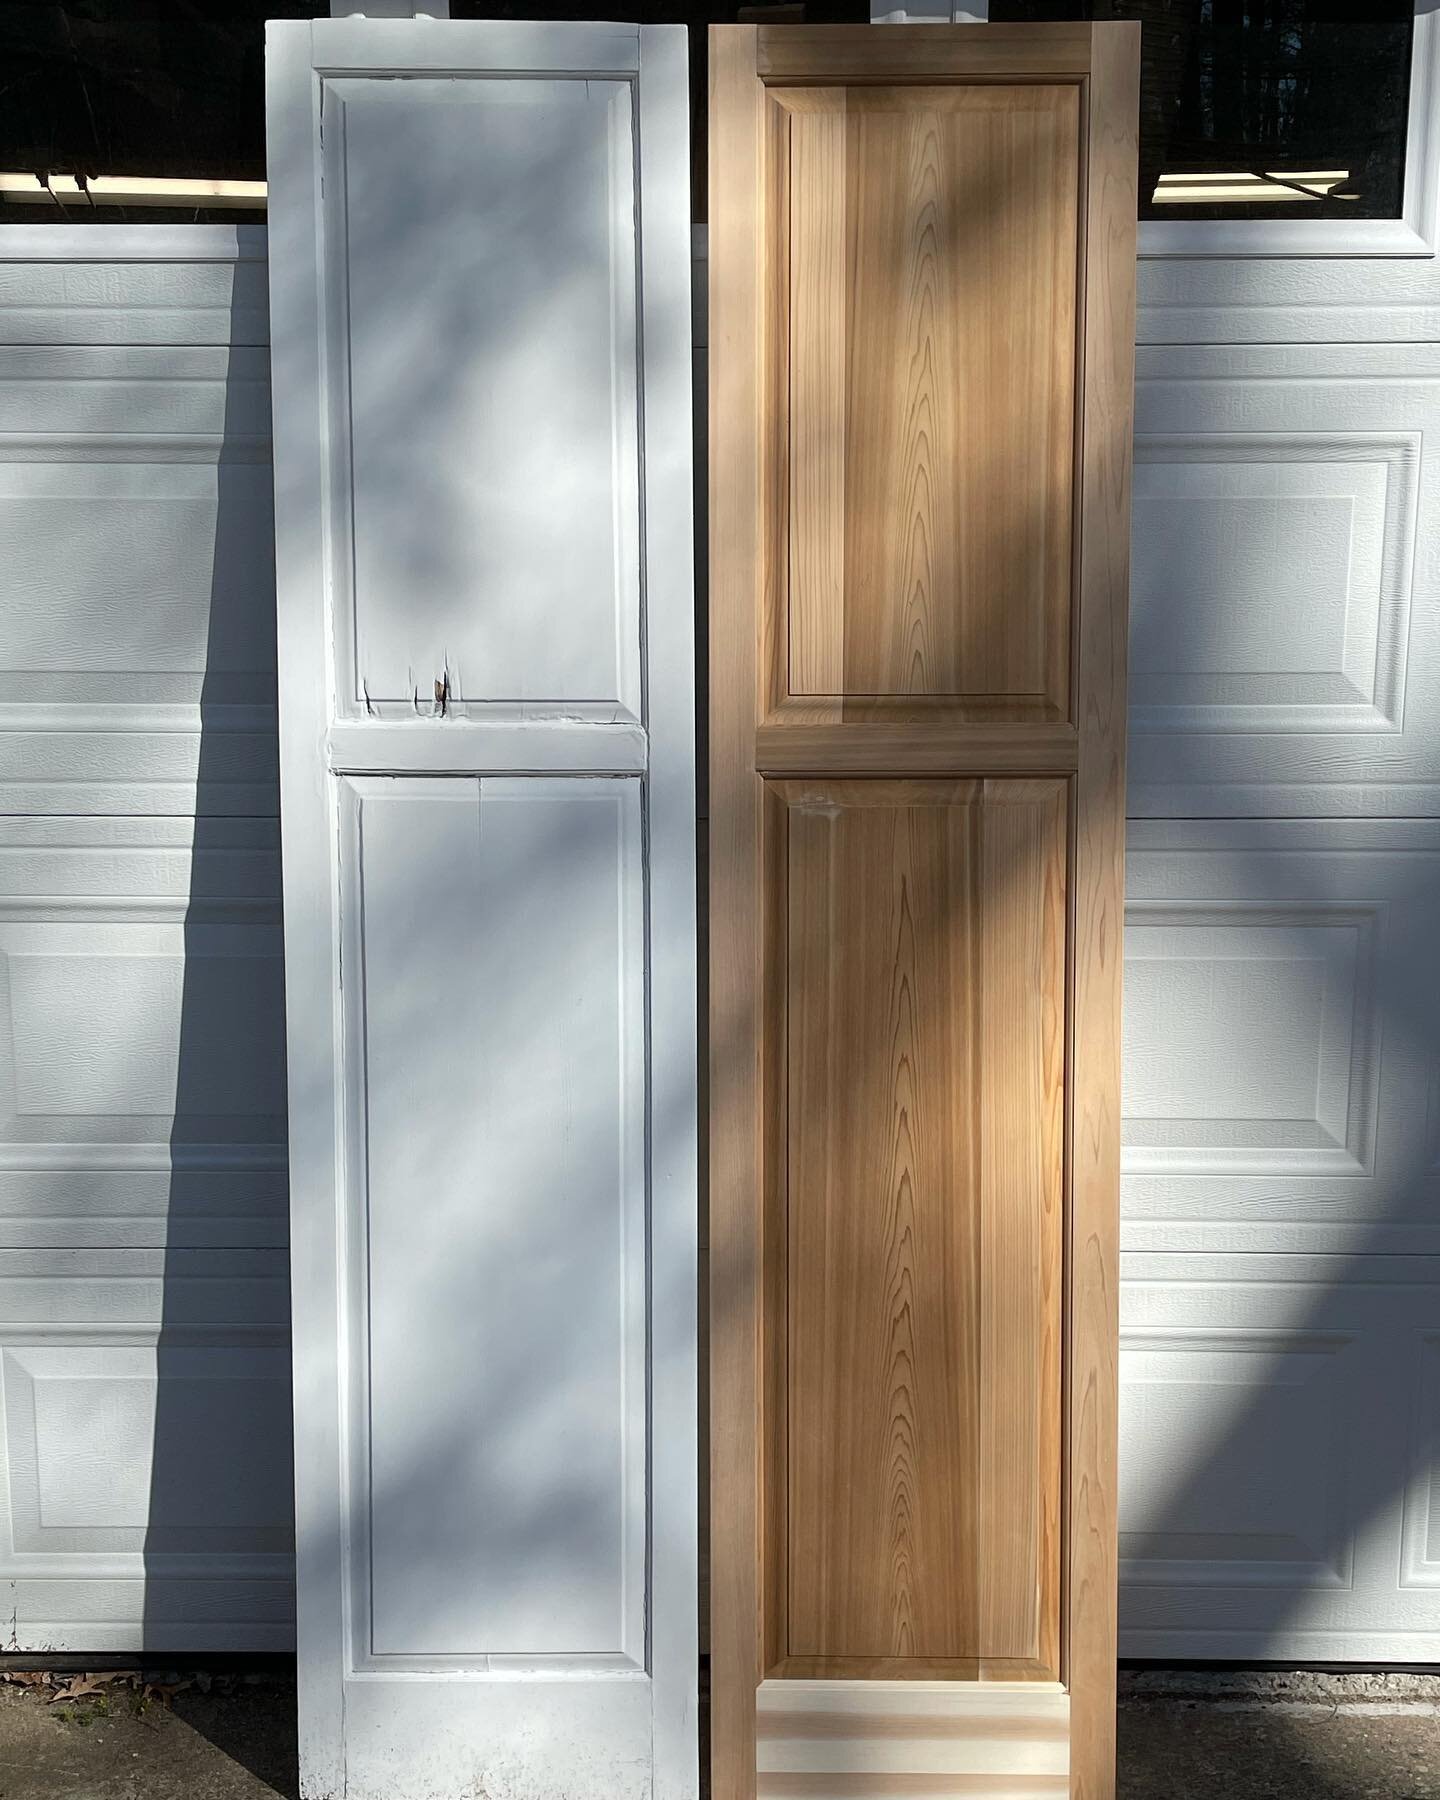 NEW SHUTTER
-
Replacement for a rotten shutter. It came out very nicely, I would enjoy more of this work. Give me a call for custom window accessories! 
-
#ceedah #westernredcedar #weatherproof #replacement #match #custom #shutter #callme #avon #cant